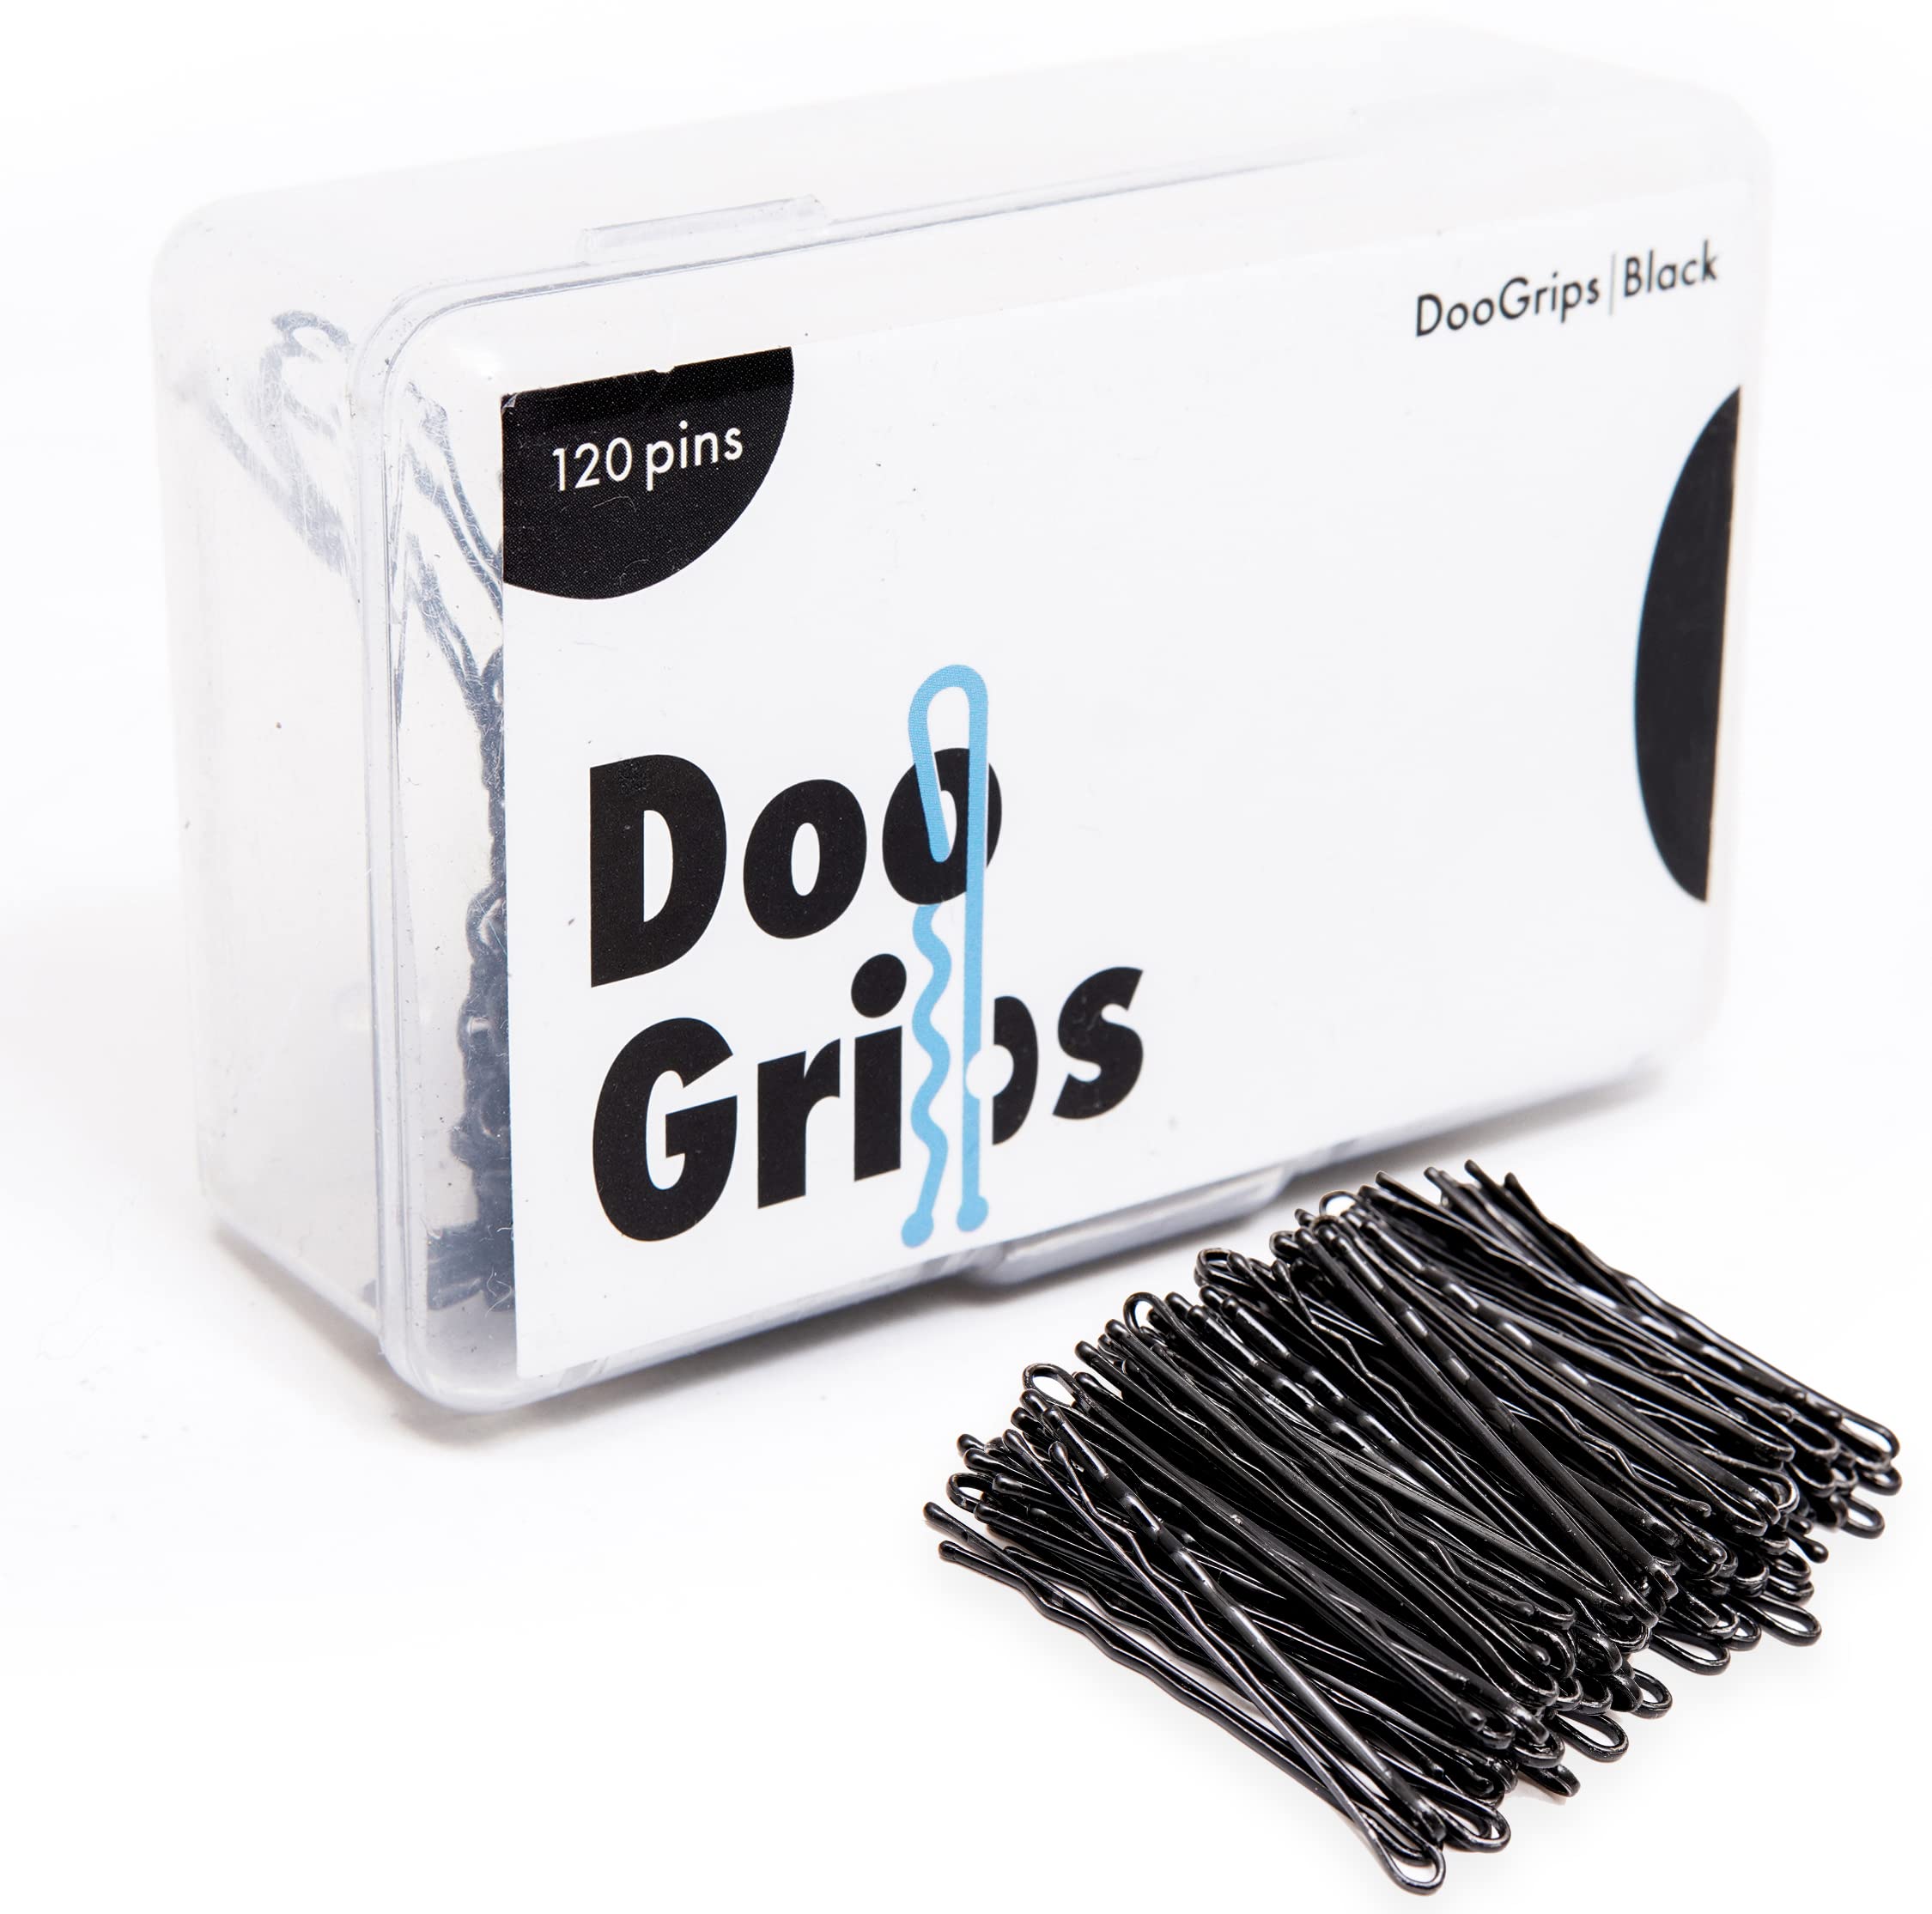 DooGrips 120 Pcs Black Bobby Pins for Thick Hair - Rustproof Black Hair Pins - Anti Slip Hair Grips for Women Fine Hair - Our Bobby Pins Black Do Not Lose Their Shape